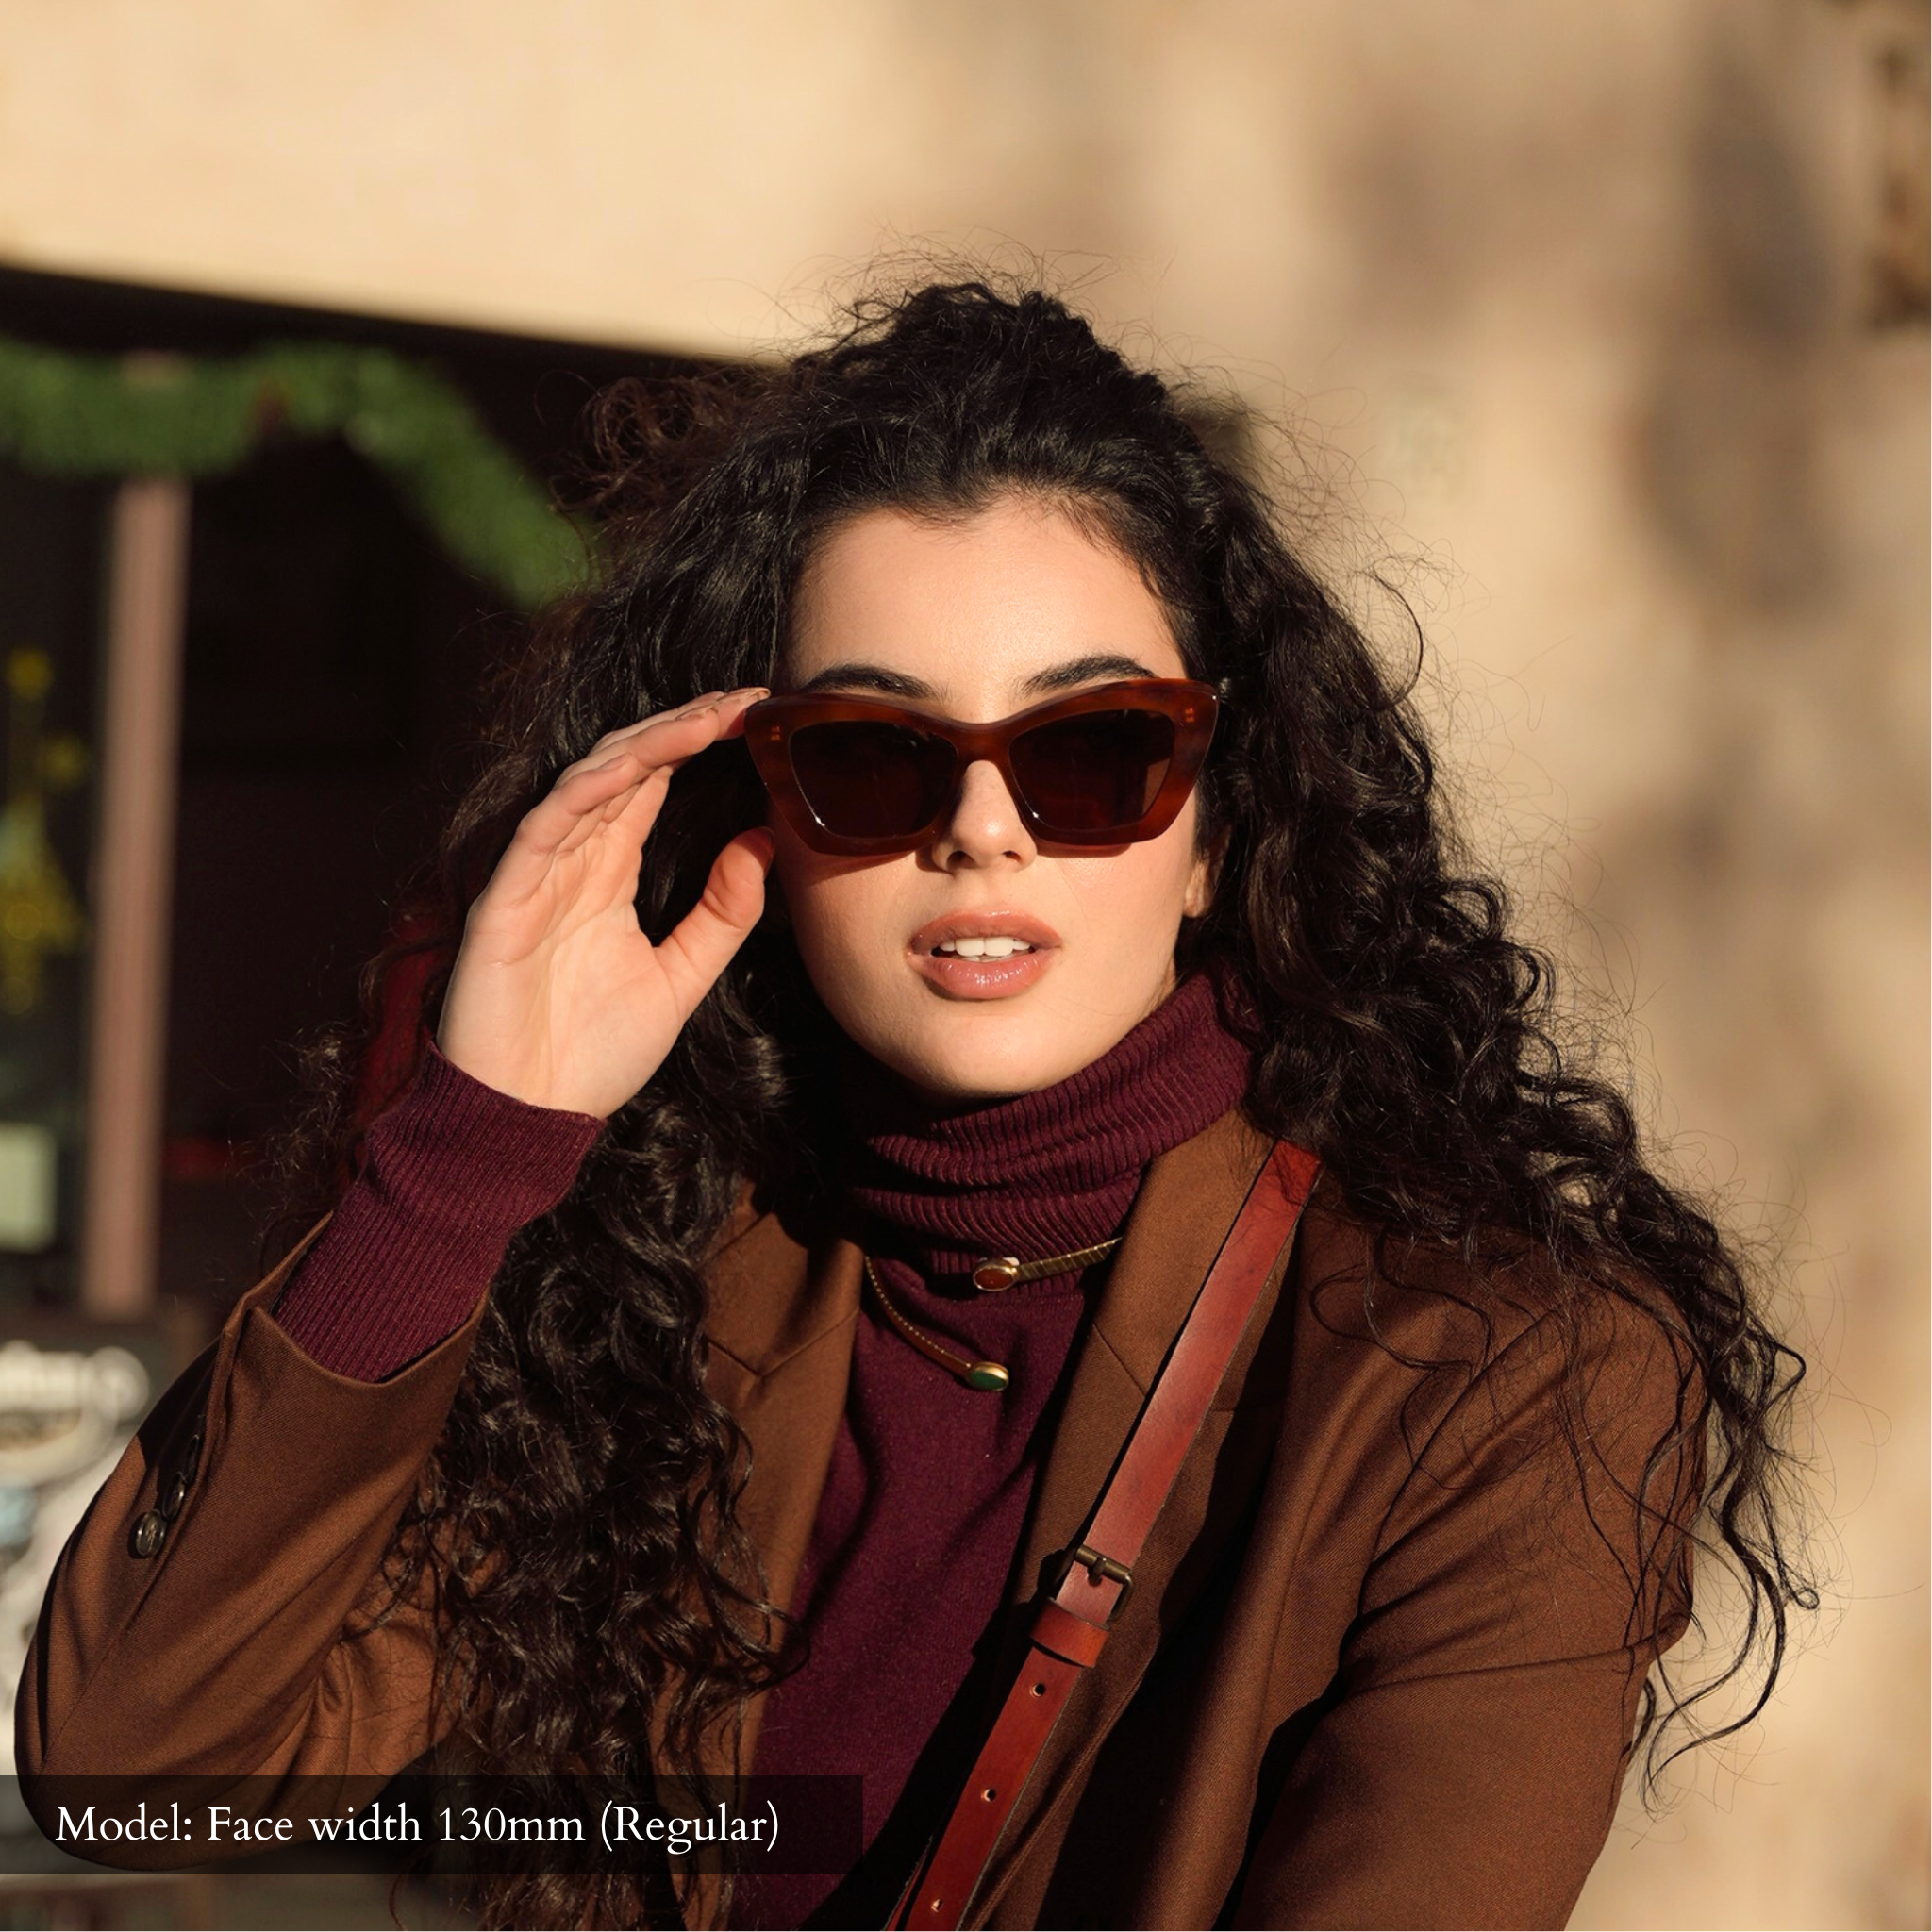 Model with regular width face wearing Memorí small fit sunglasses, which are designed specifically for petite faces. 